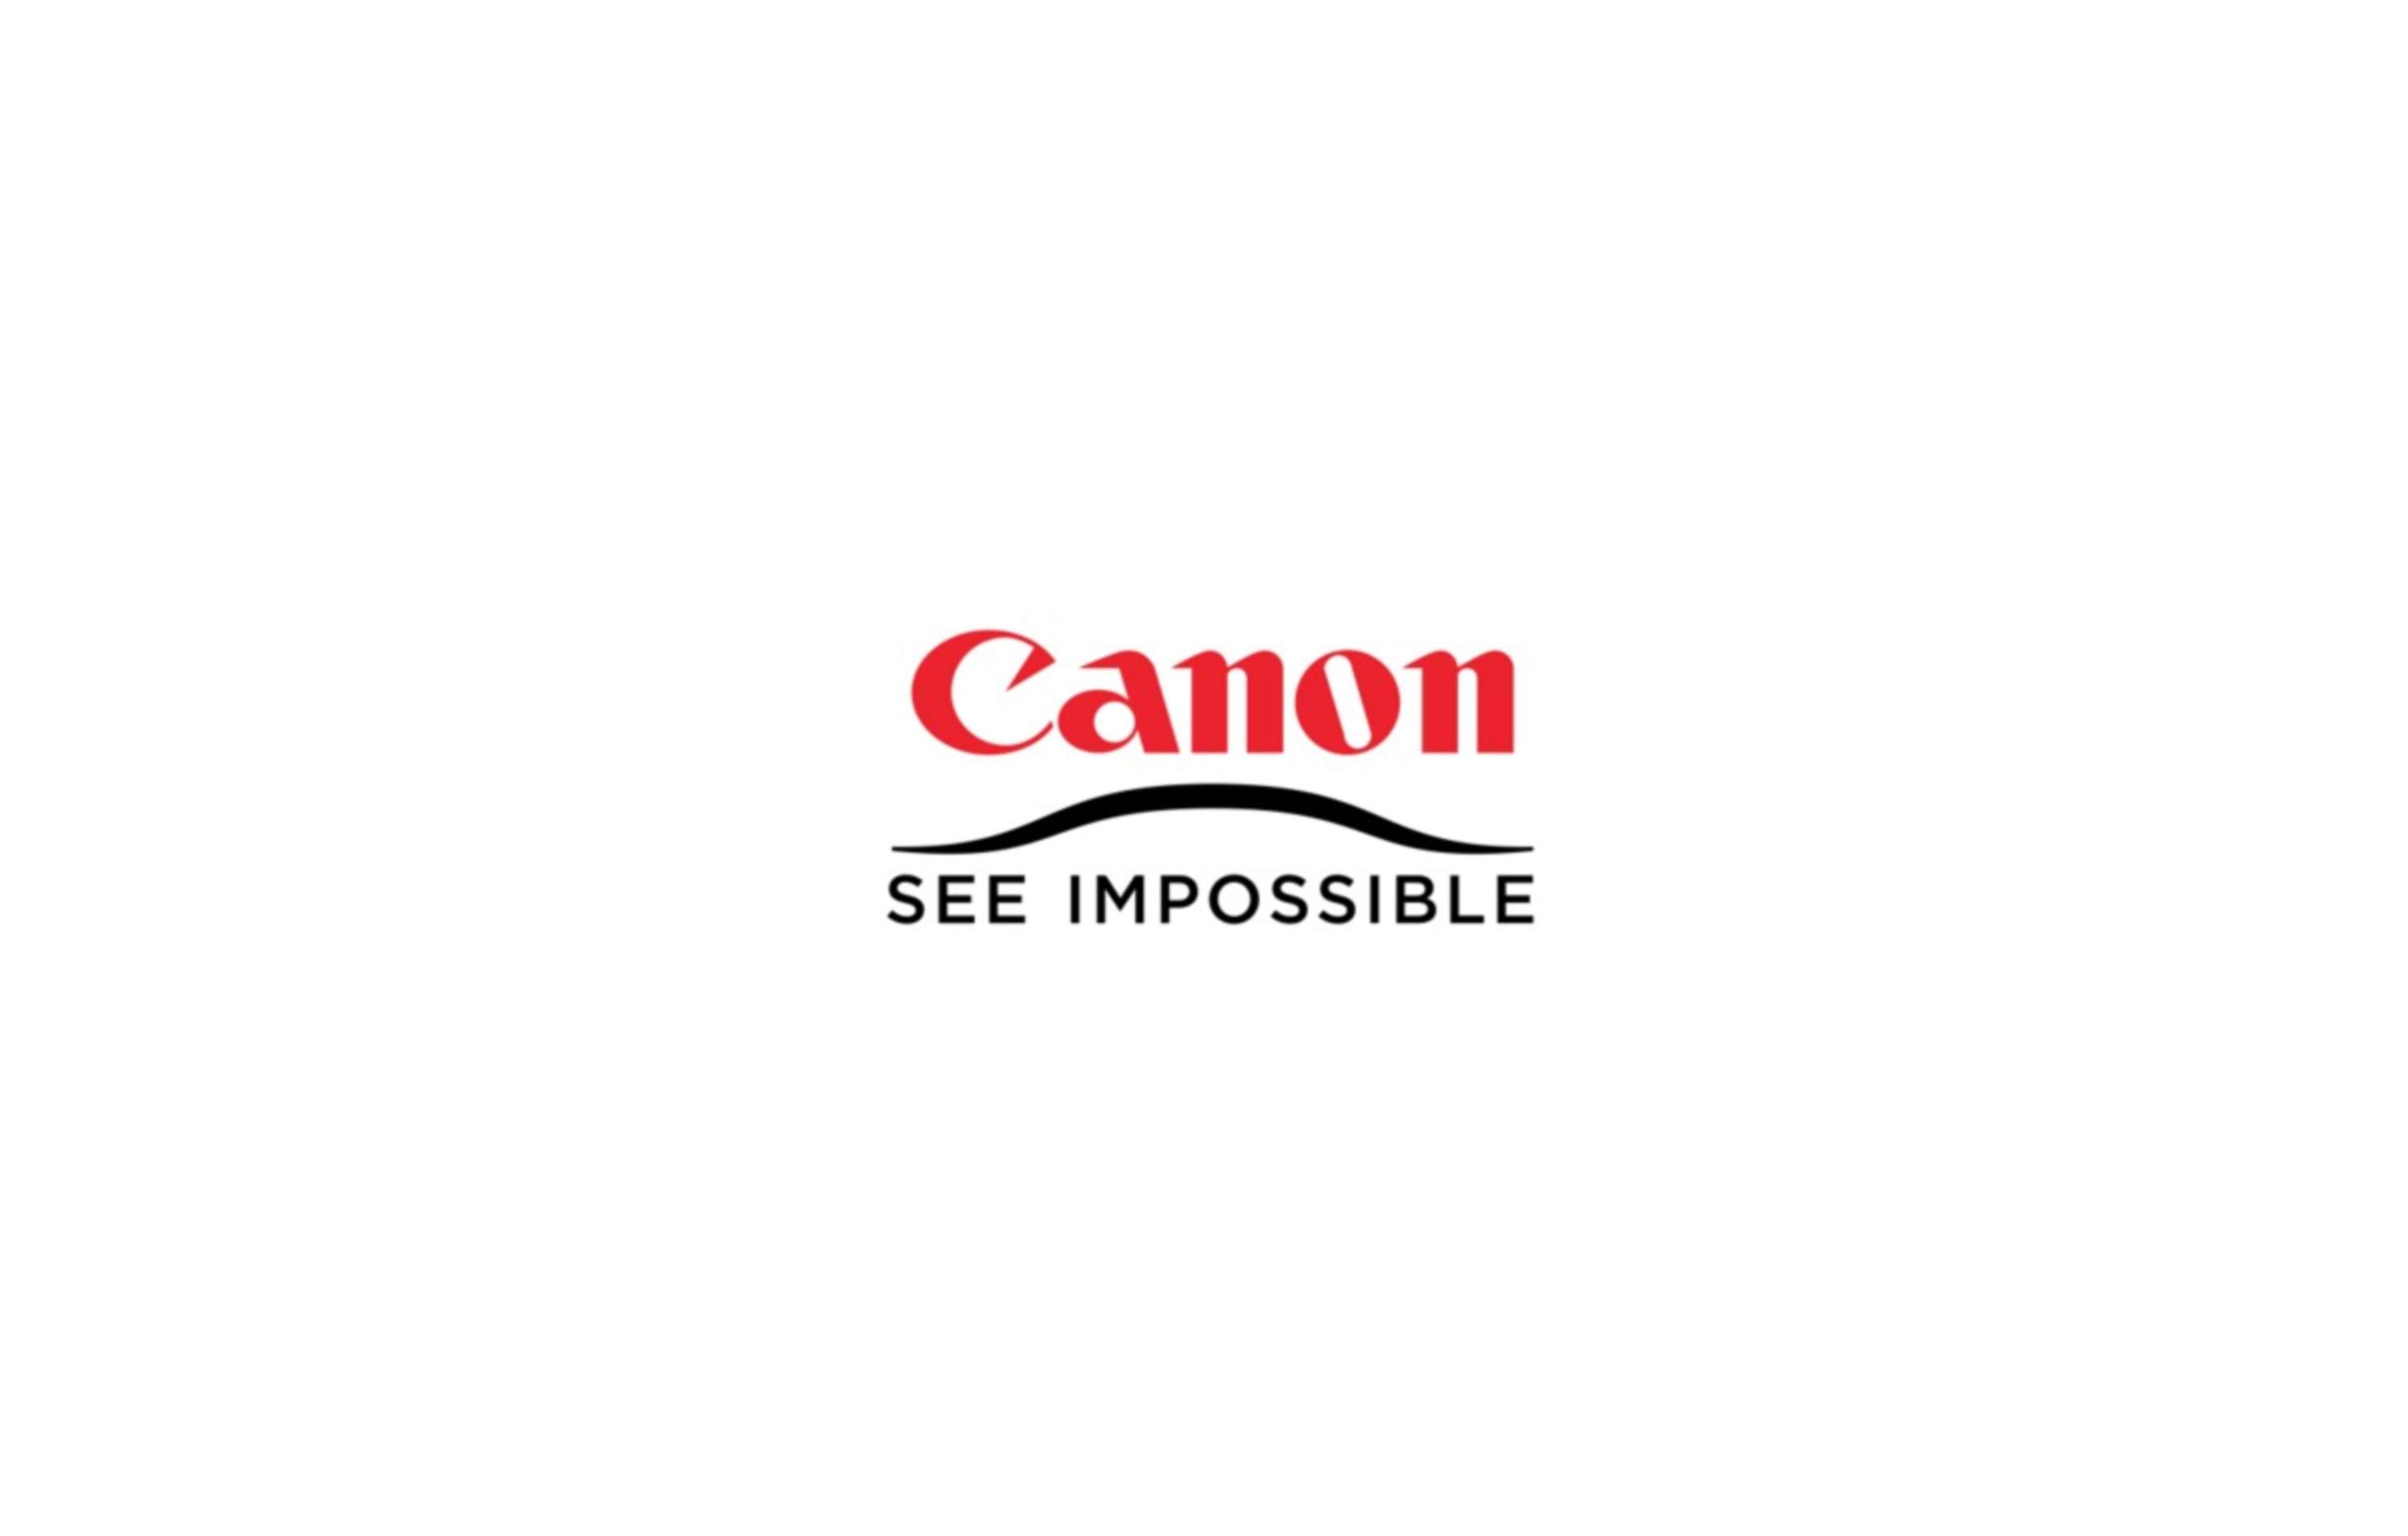 Canon See Impossible Logo - PITCHING : Canon Logo Design